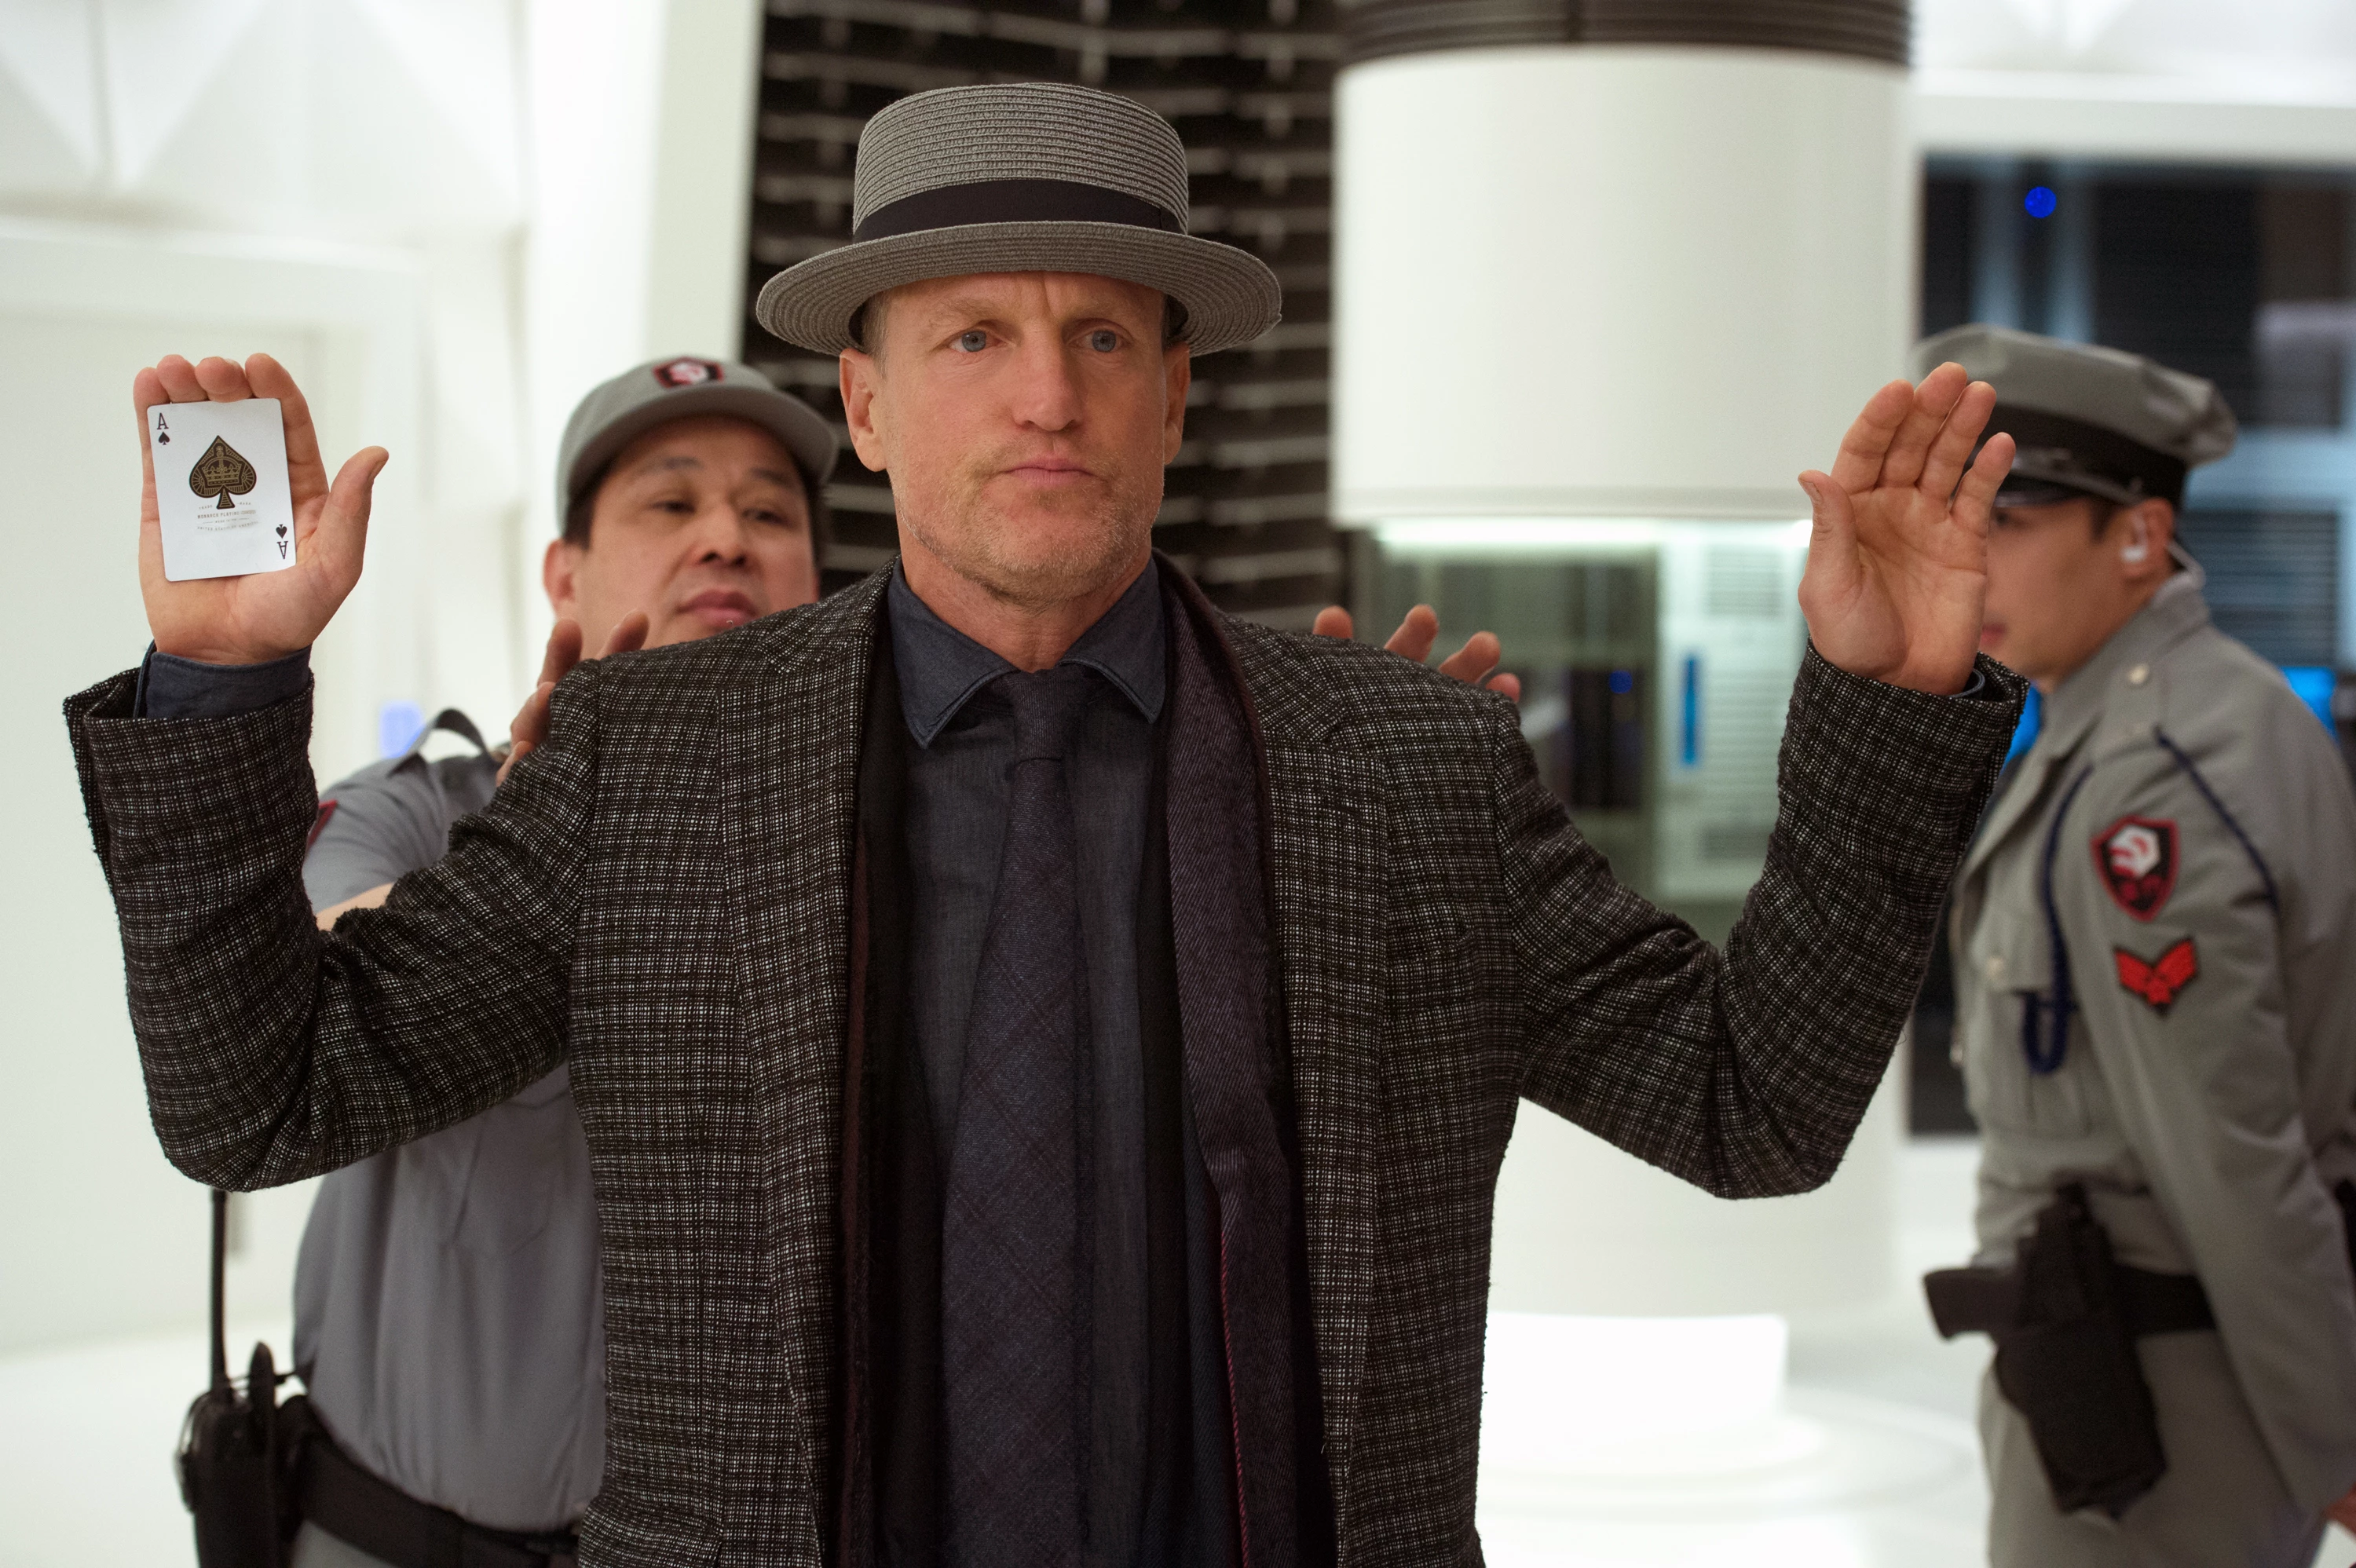 now you see me 3 canceled